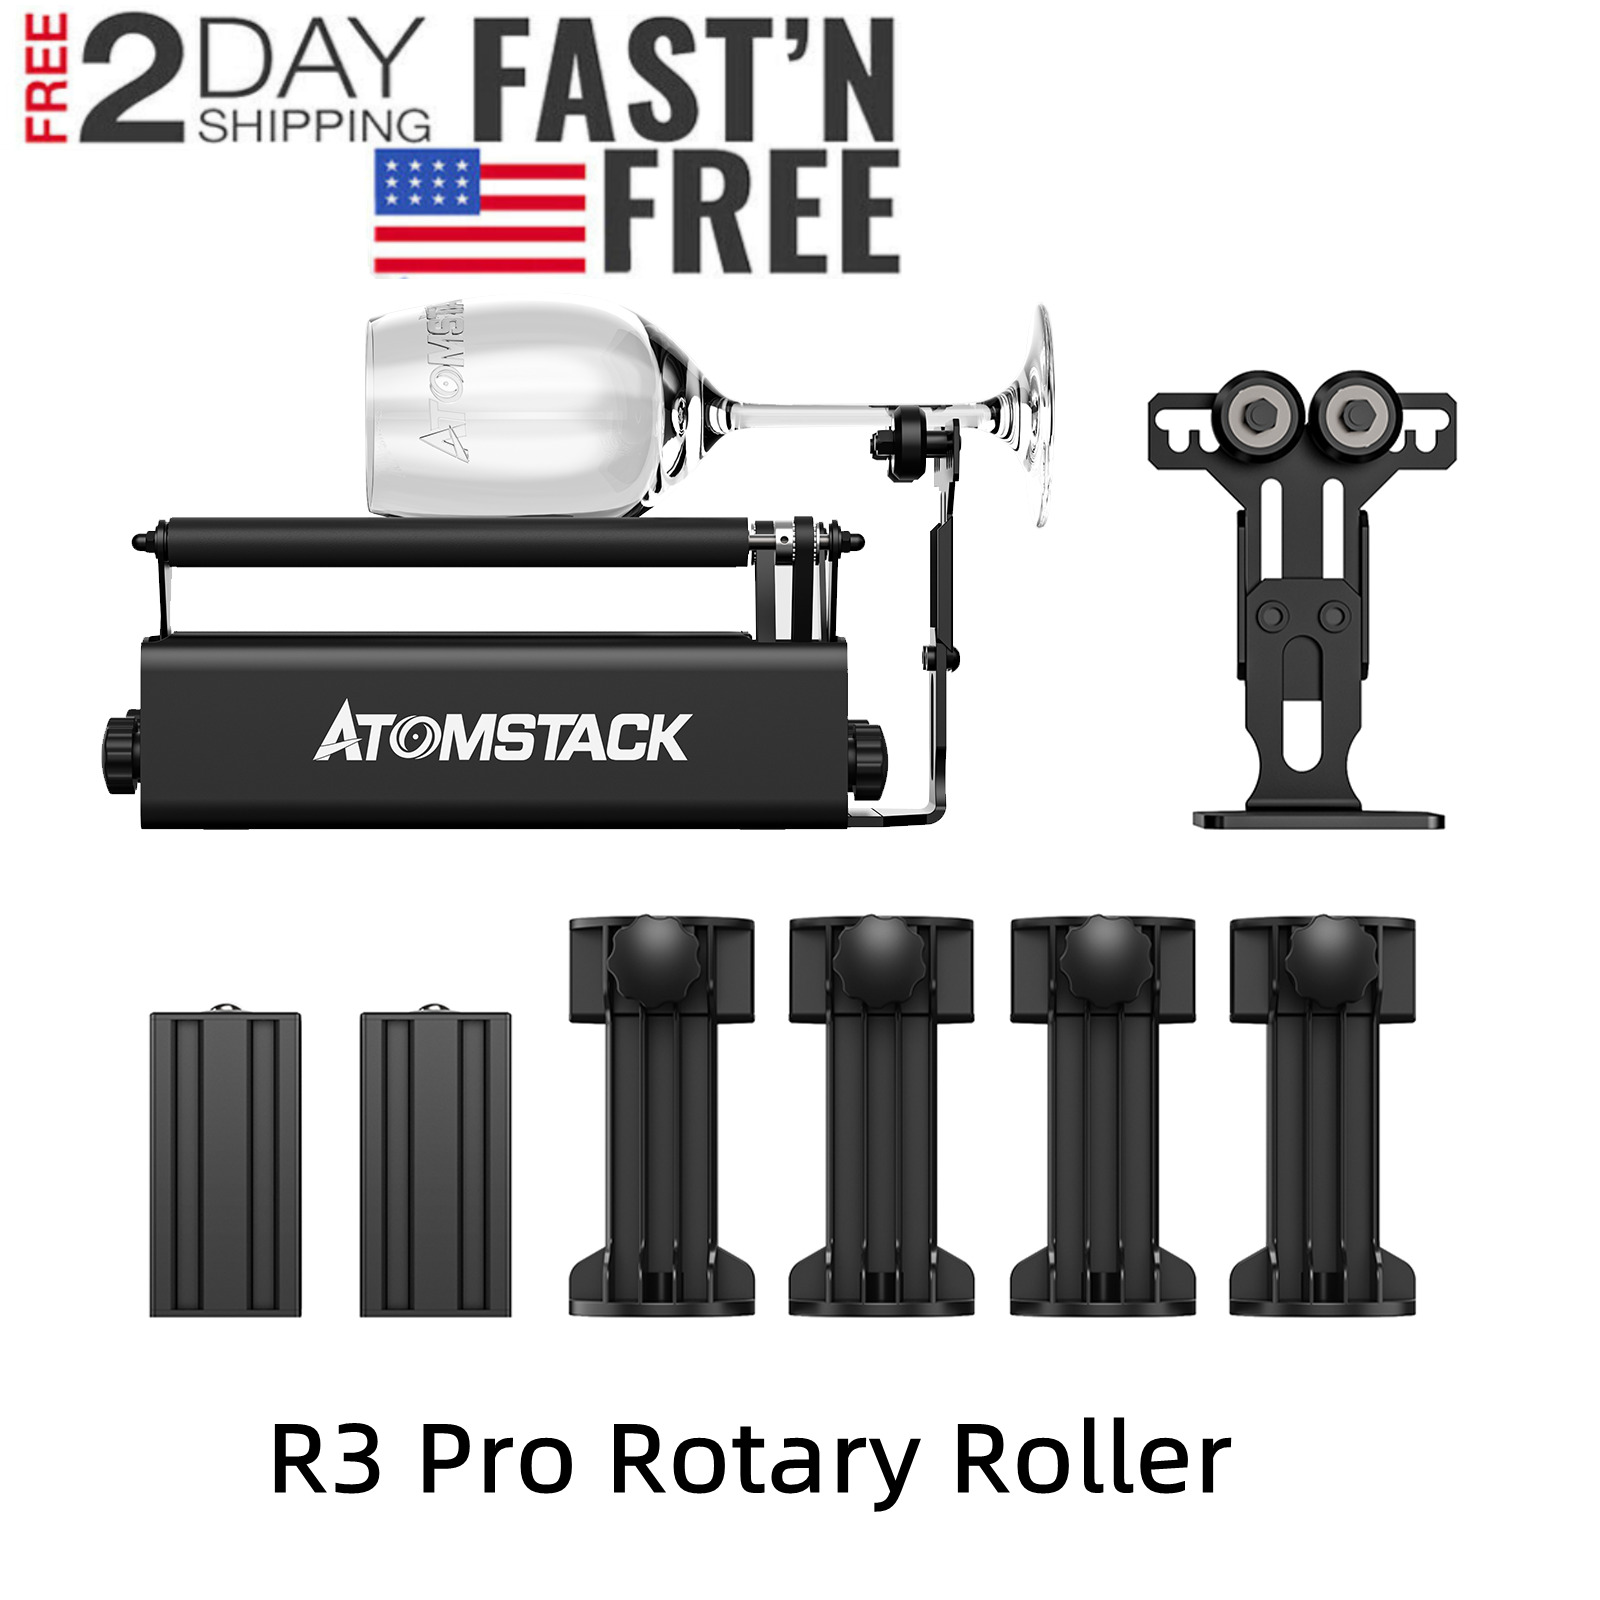 ATOMSTACK R3 Pro Rotary Roller Kits Engraving Machine Rotary Roller With Support